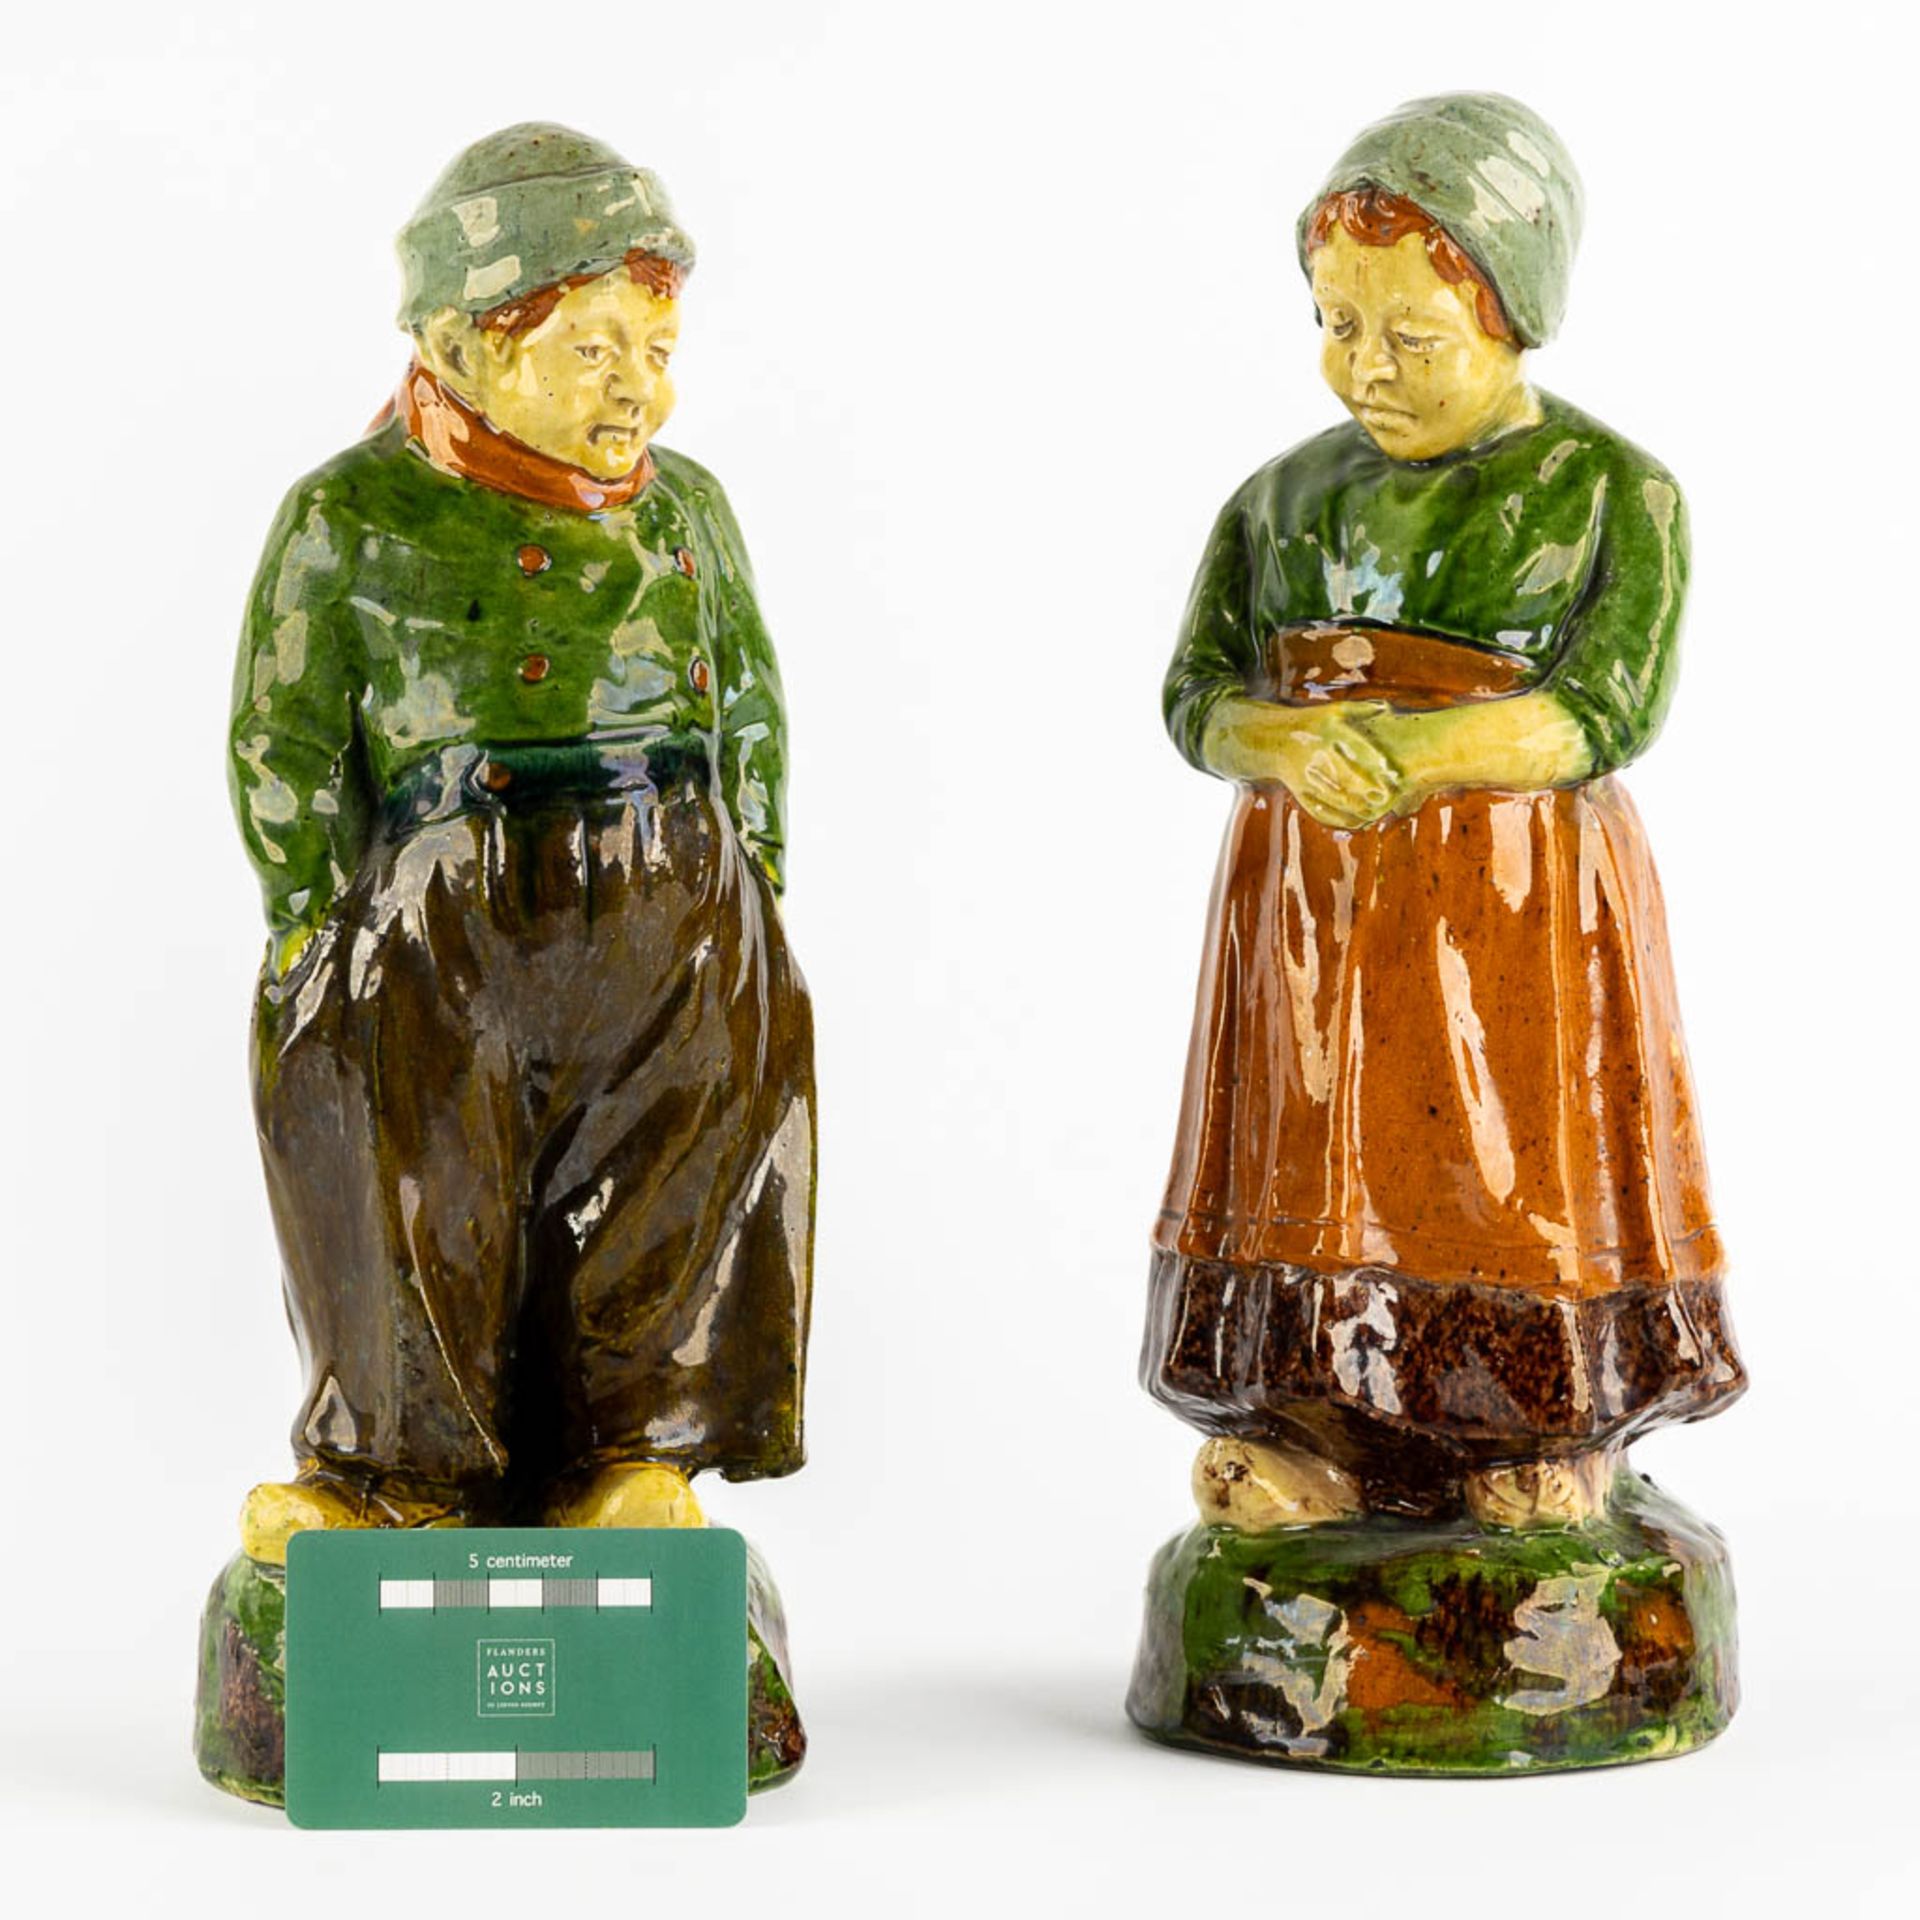 Figurine of a Man and Woman, Flemish Earthenware, possibly Caessens. Circa 1900. (H:32 x D:12 cm) - Image 2 of 9